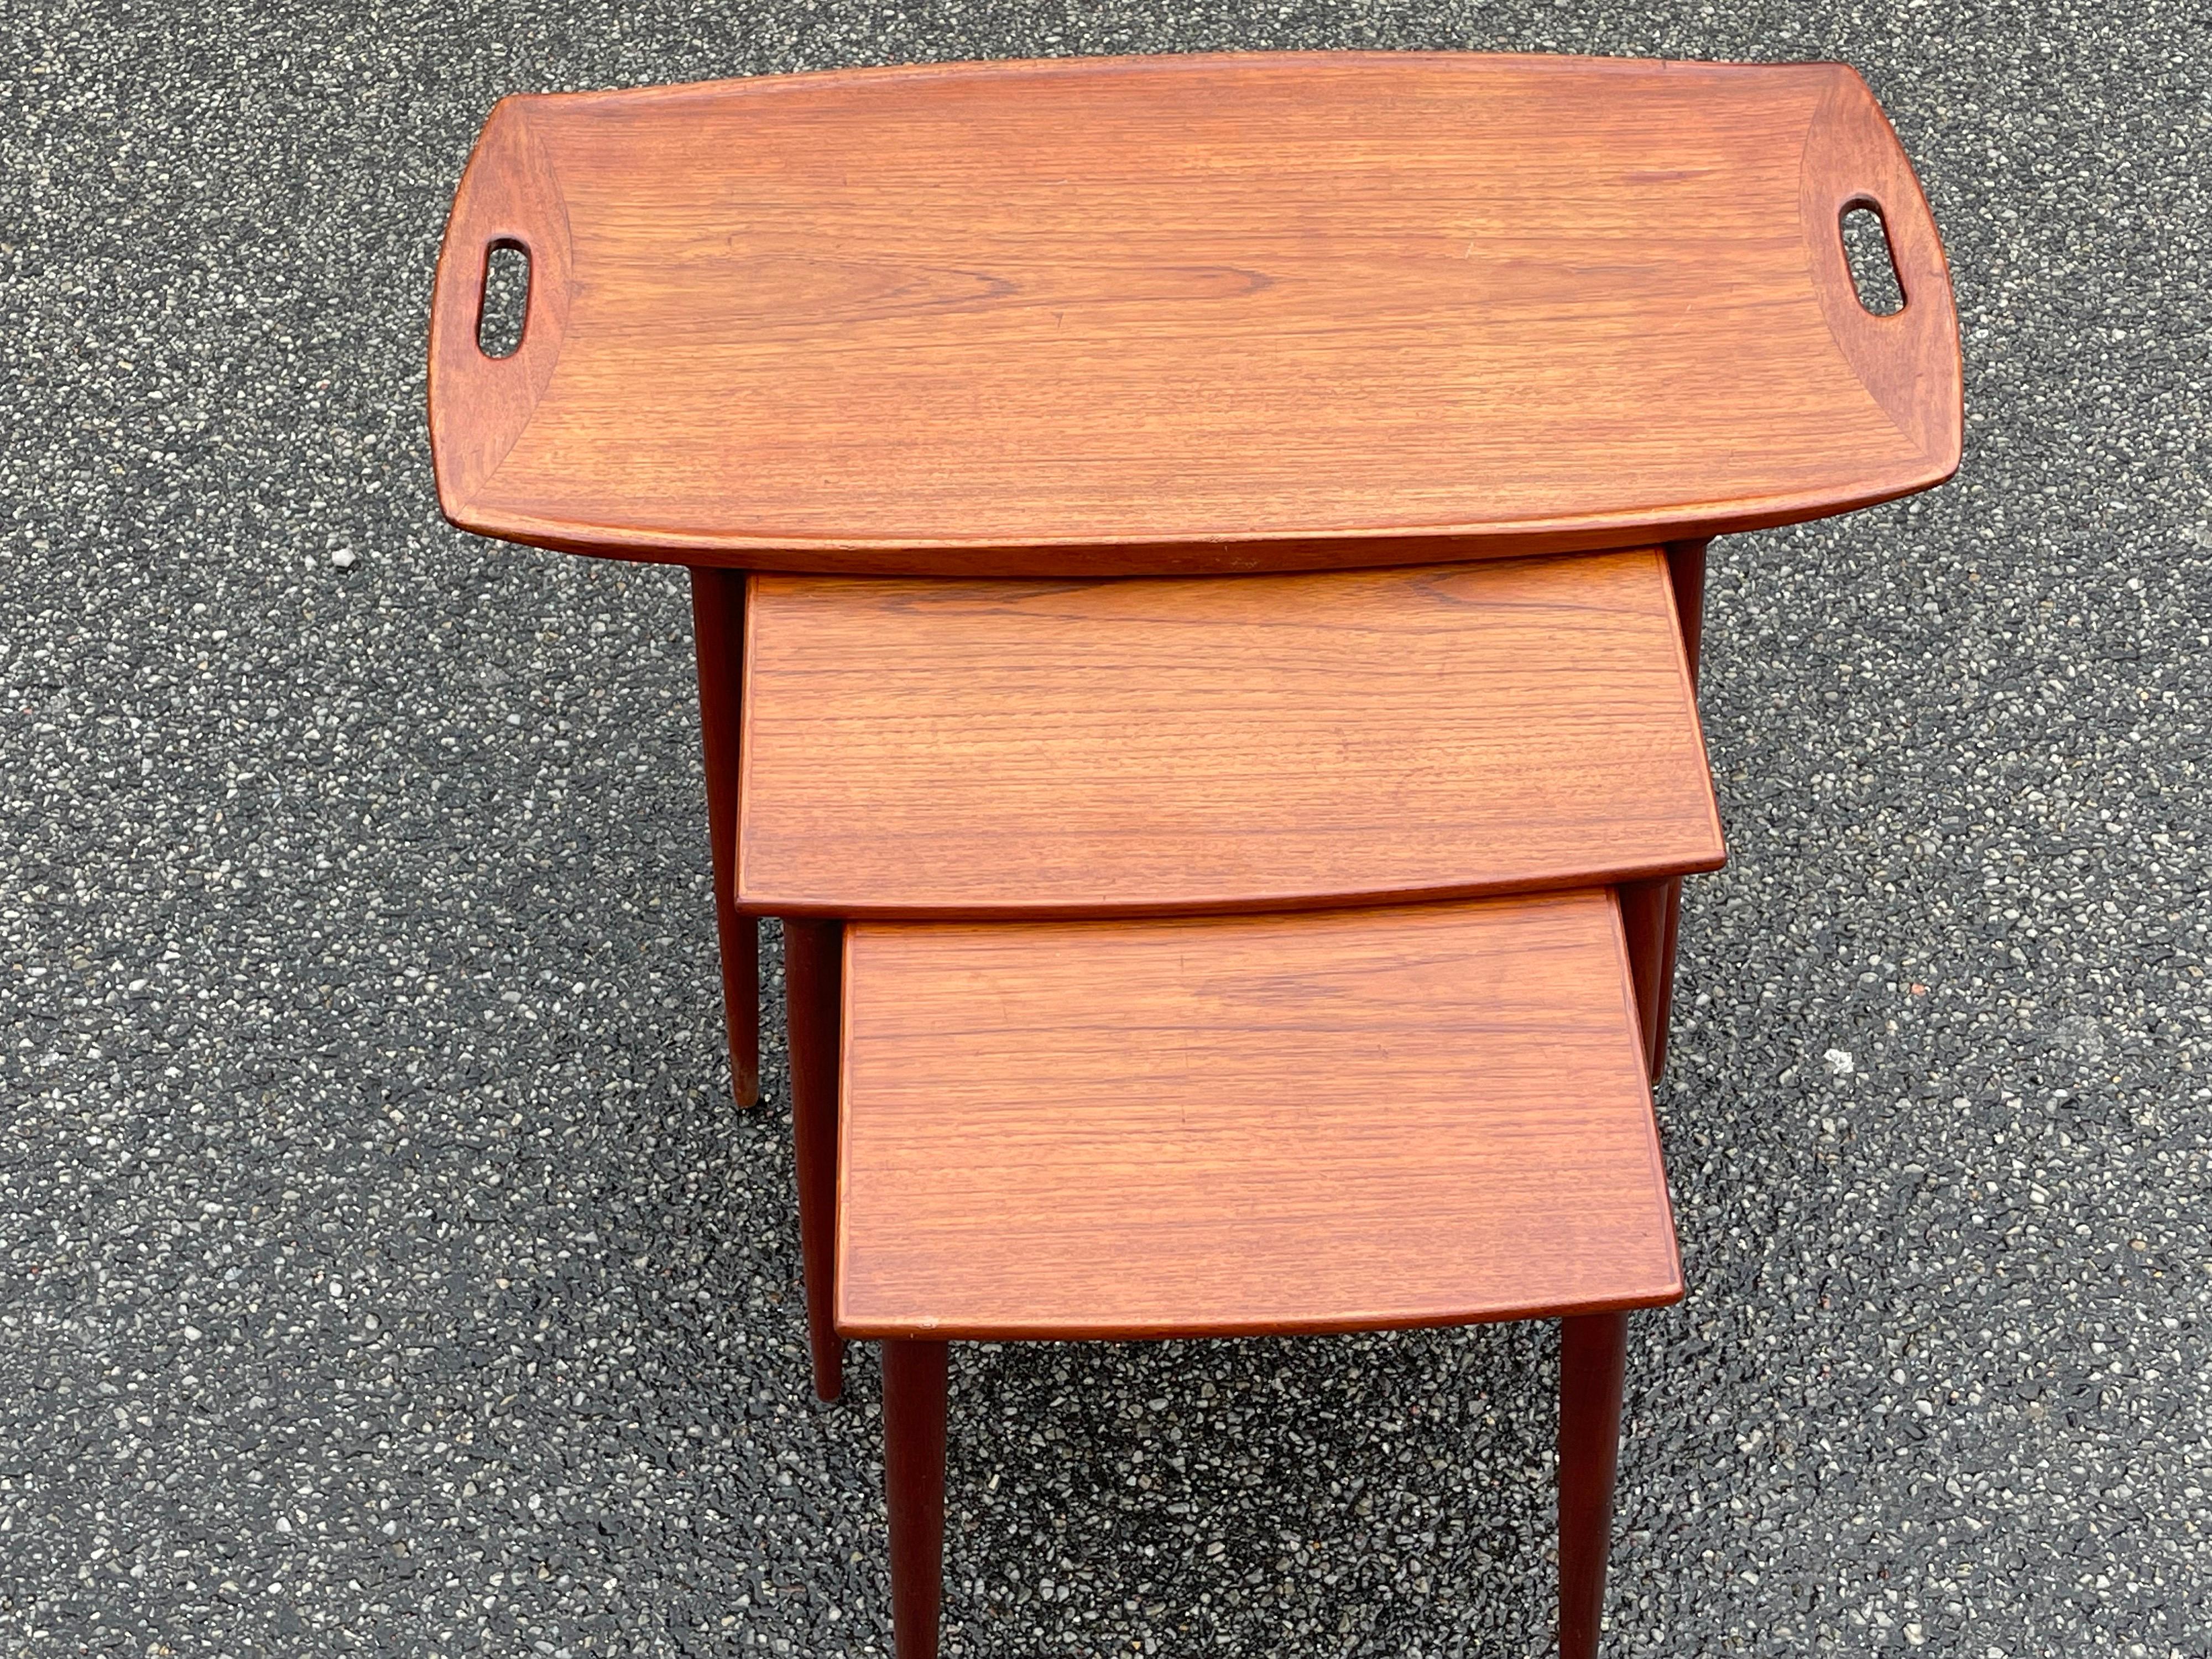 Danish No. 8 teak Nesting Tables by A. Jakobsen for Poul Jeppesens Møbelfabrik, 1960s, This set of nesting tables with tapered legs was designed in 1964. The largest table is in the form of a tray with a raised edge. These are truly some beautiful